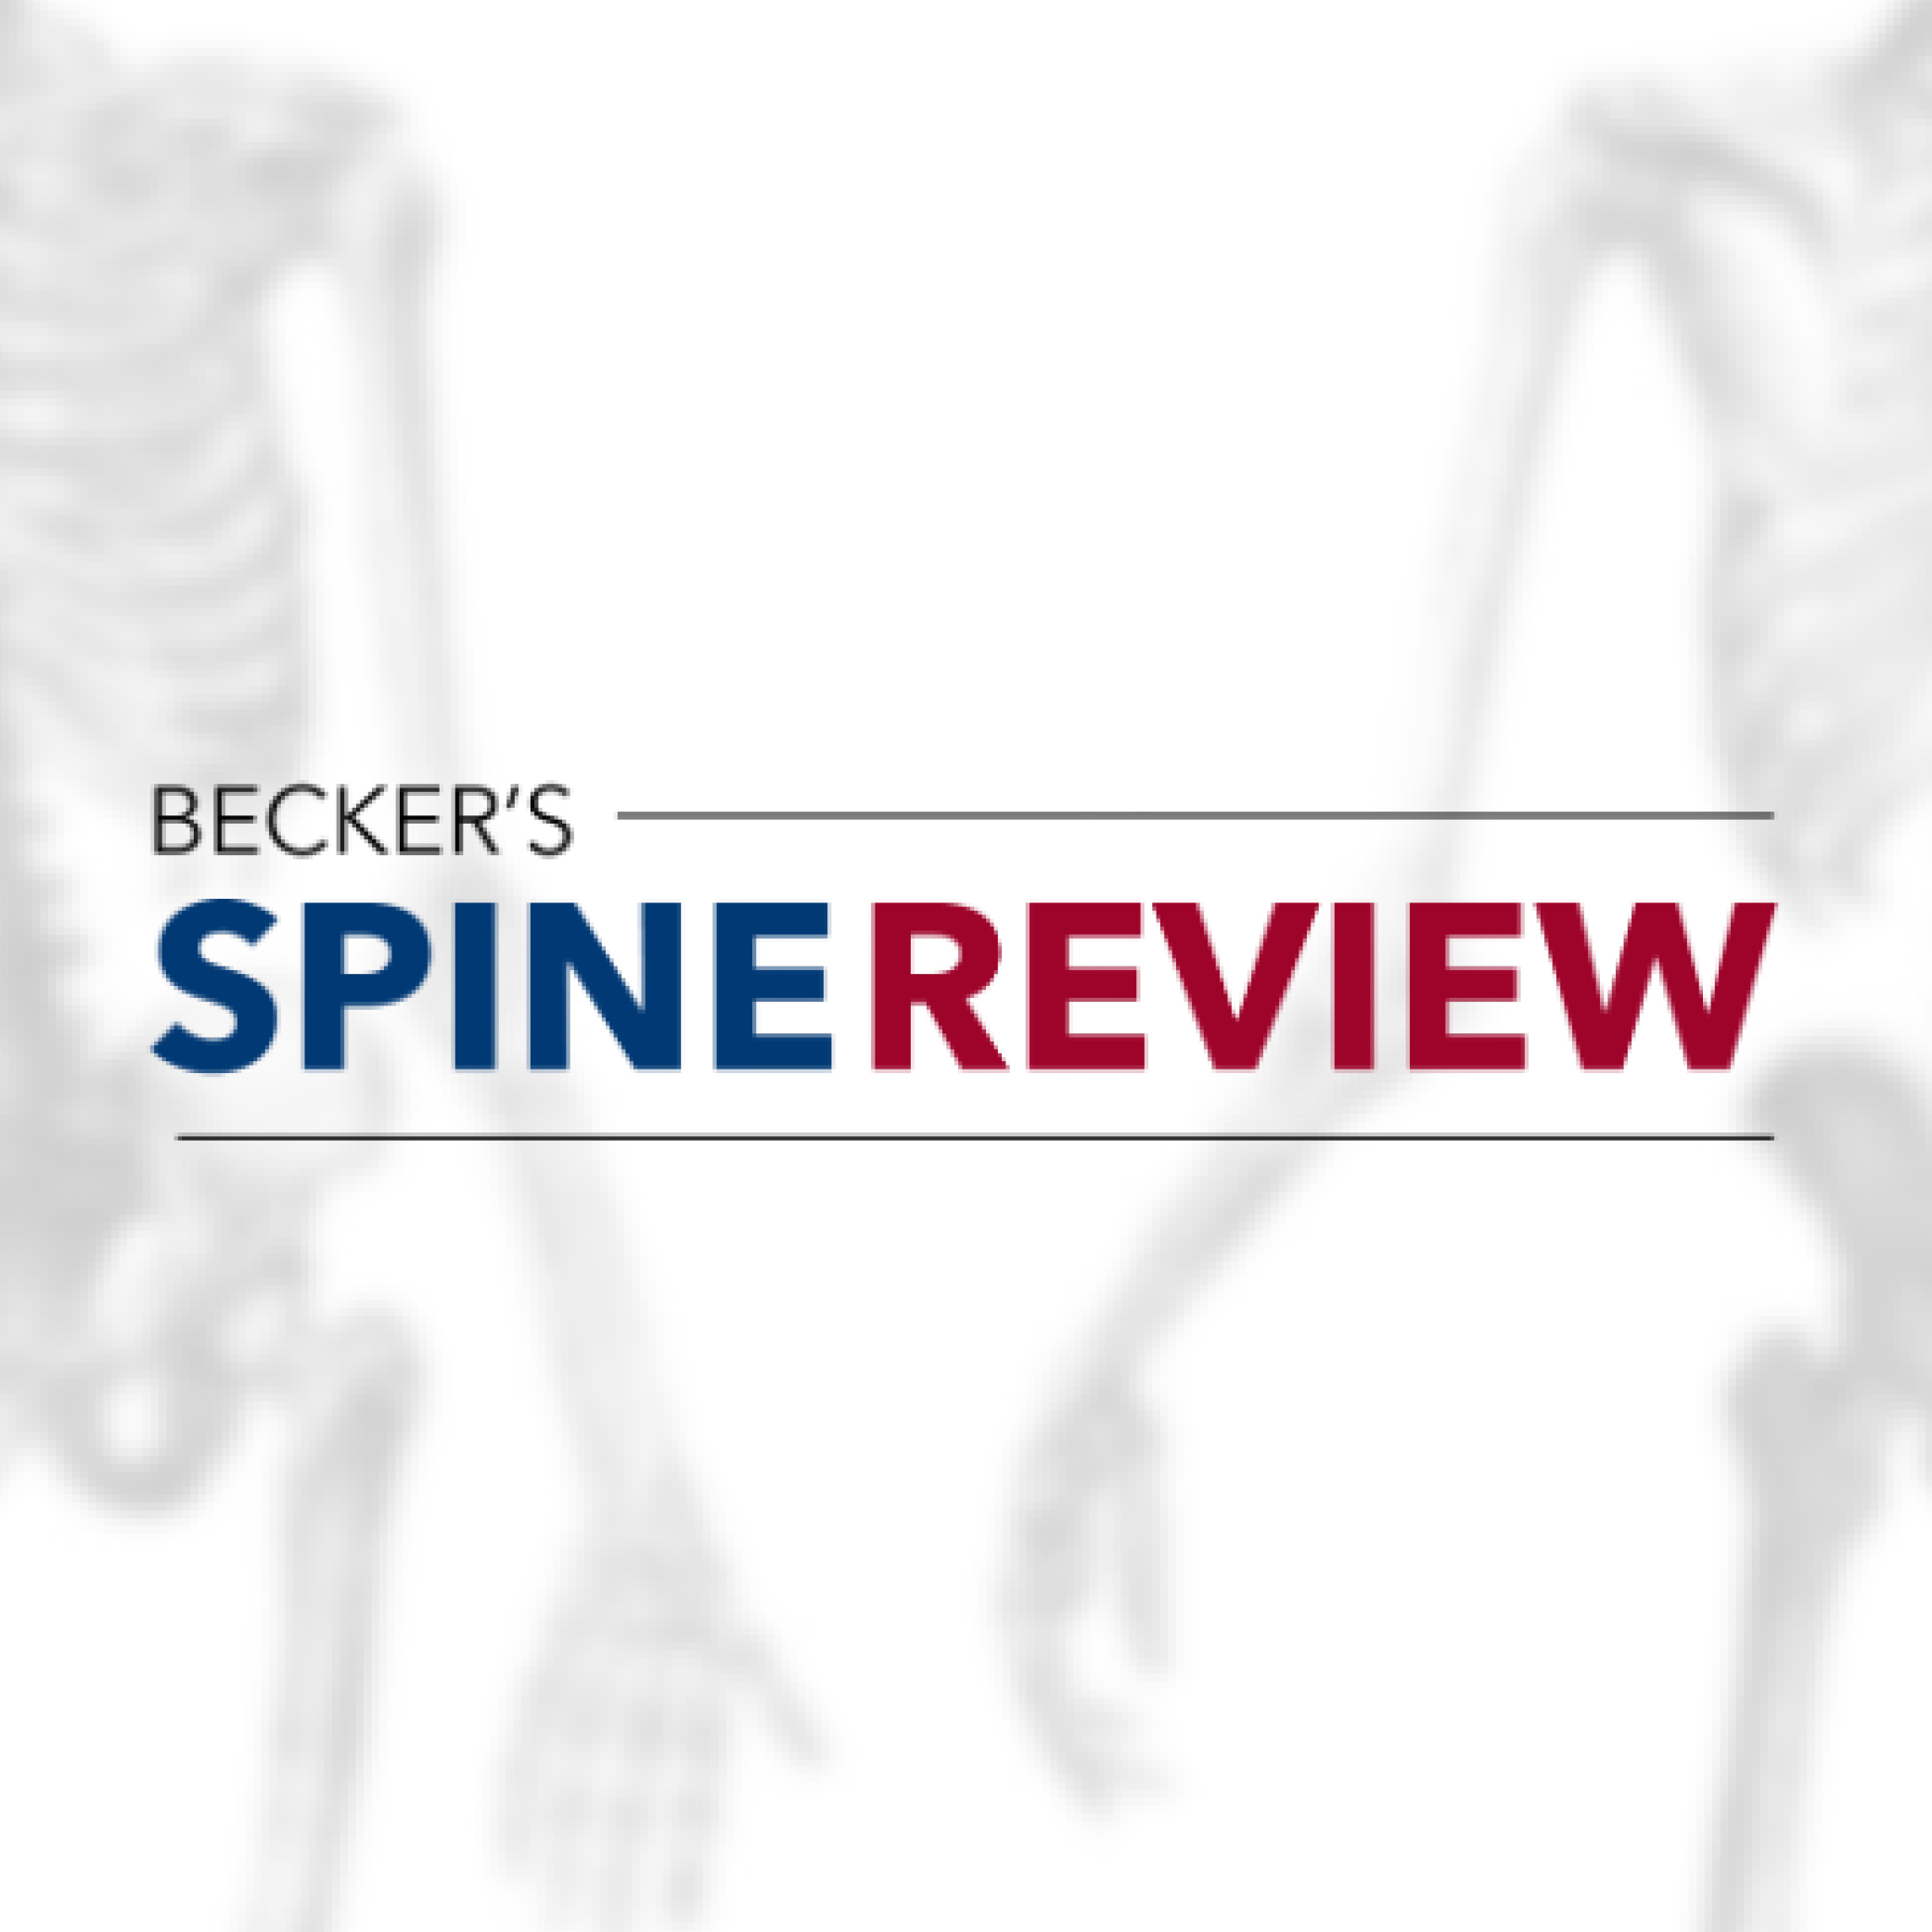 Becker's Spine Review